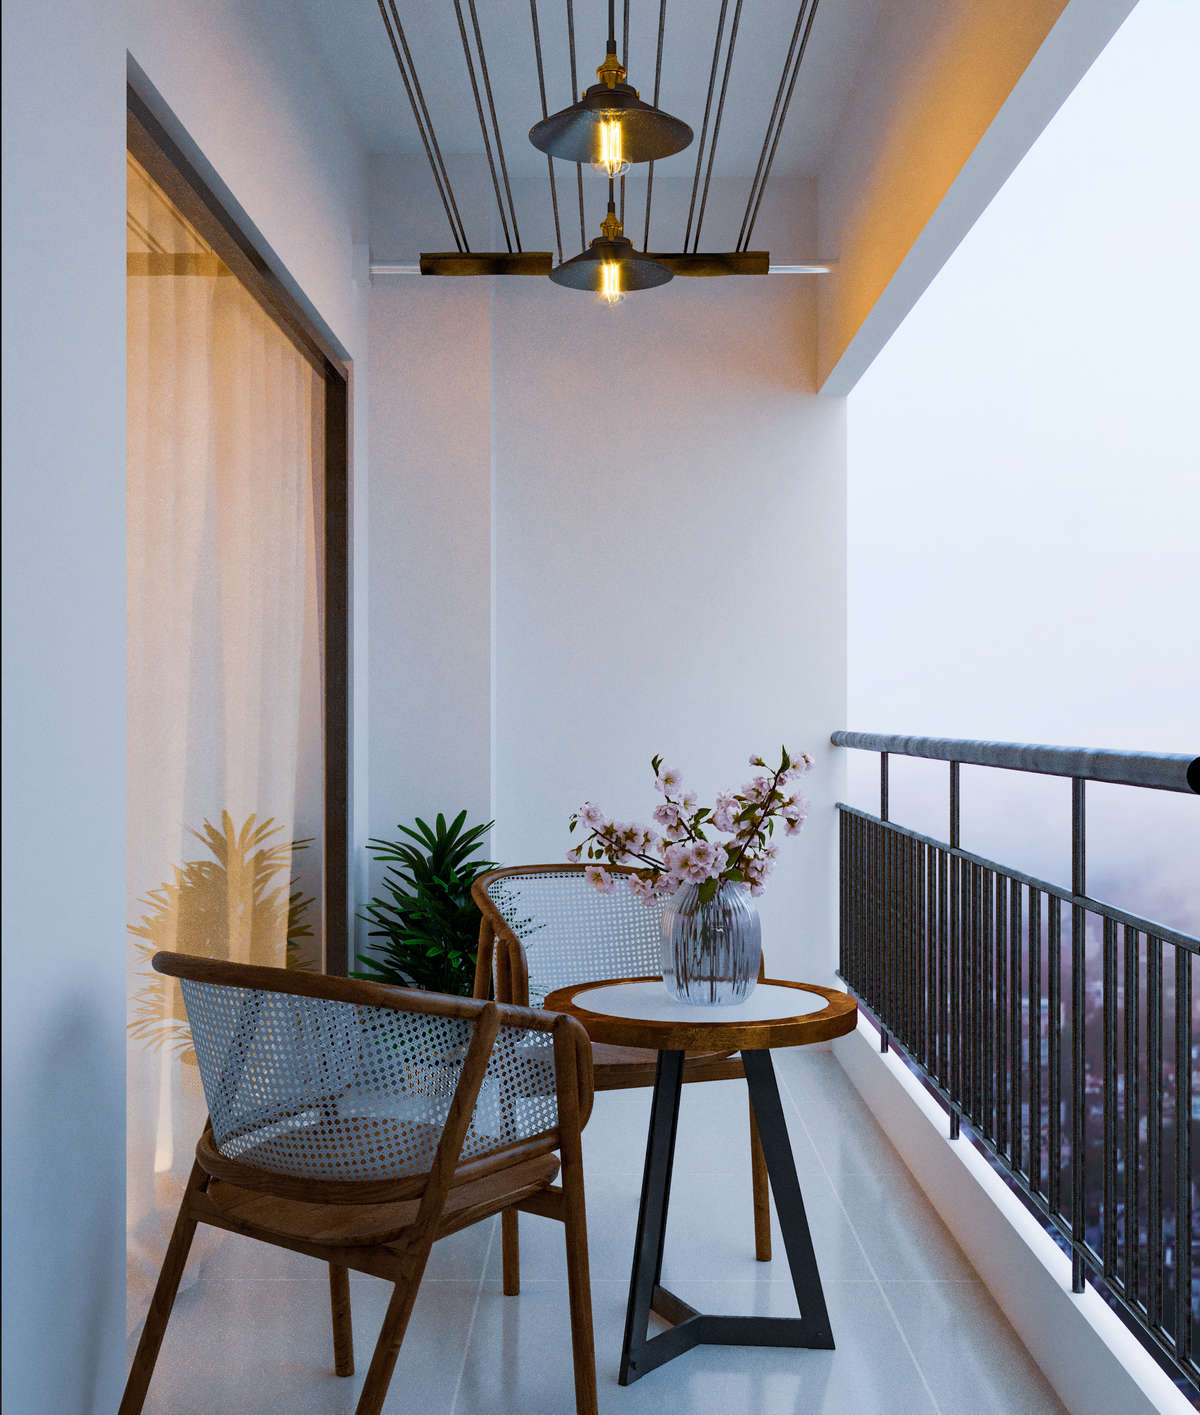 cool white balcony. peaceful balcony gives peaceful morning & Evening.

#sthaayi_design_lab #sthaayi
#balcony #white #chair #morning #evening #vibes #cool #colors.